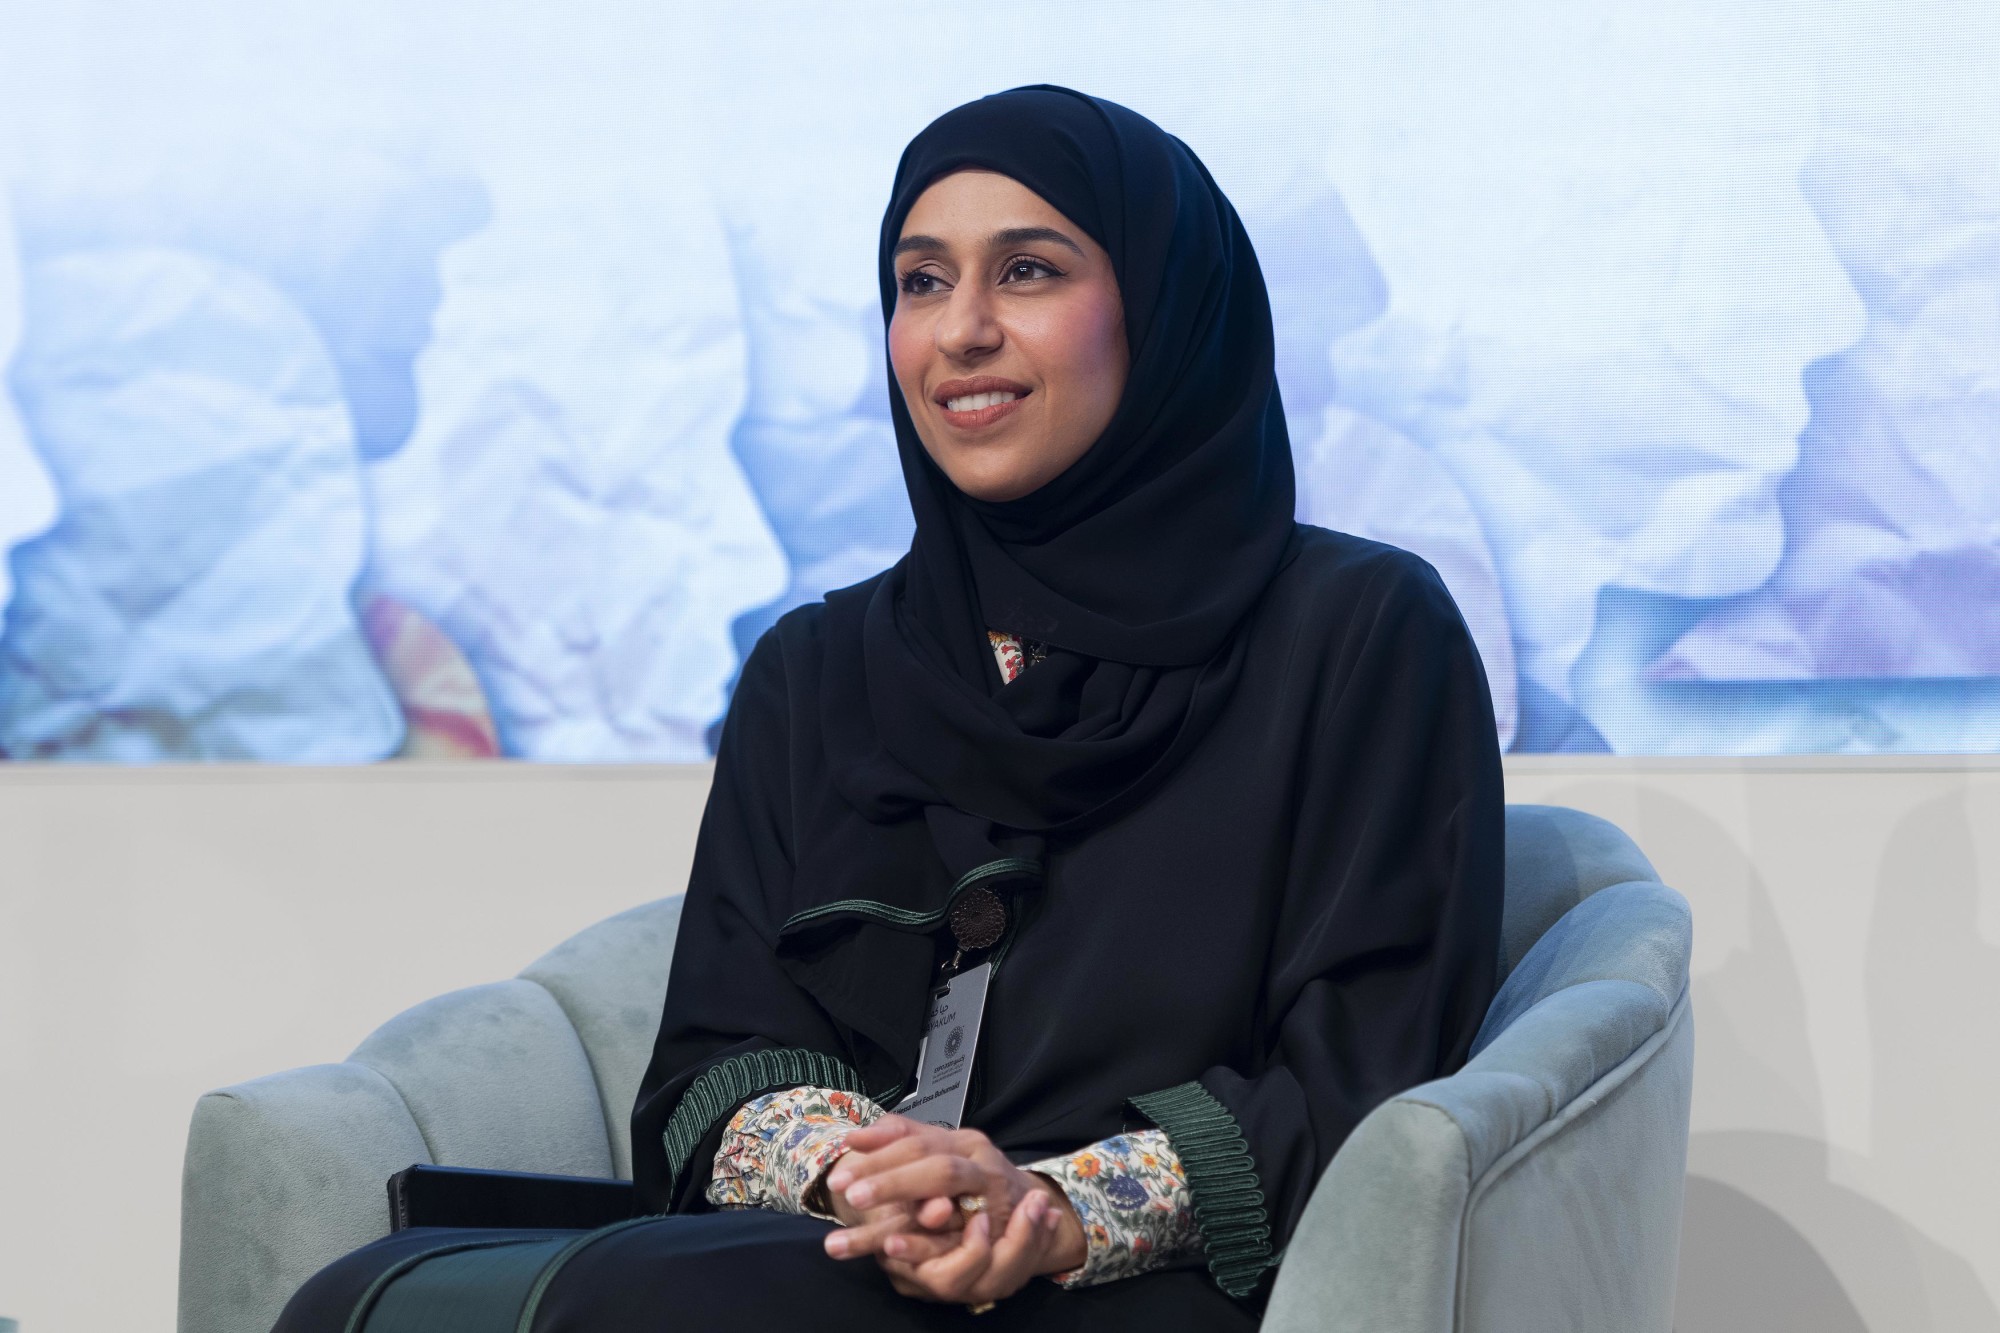 Her Excellency Hessa bint Essa Buhumaid, Minister of Community Development during the Outlier Series Ewaa - Women-s Pavilion Event m17798